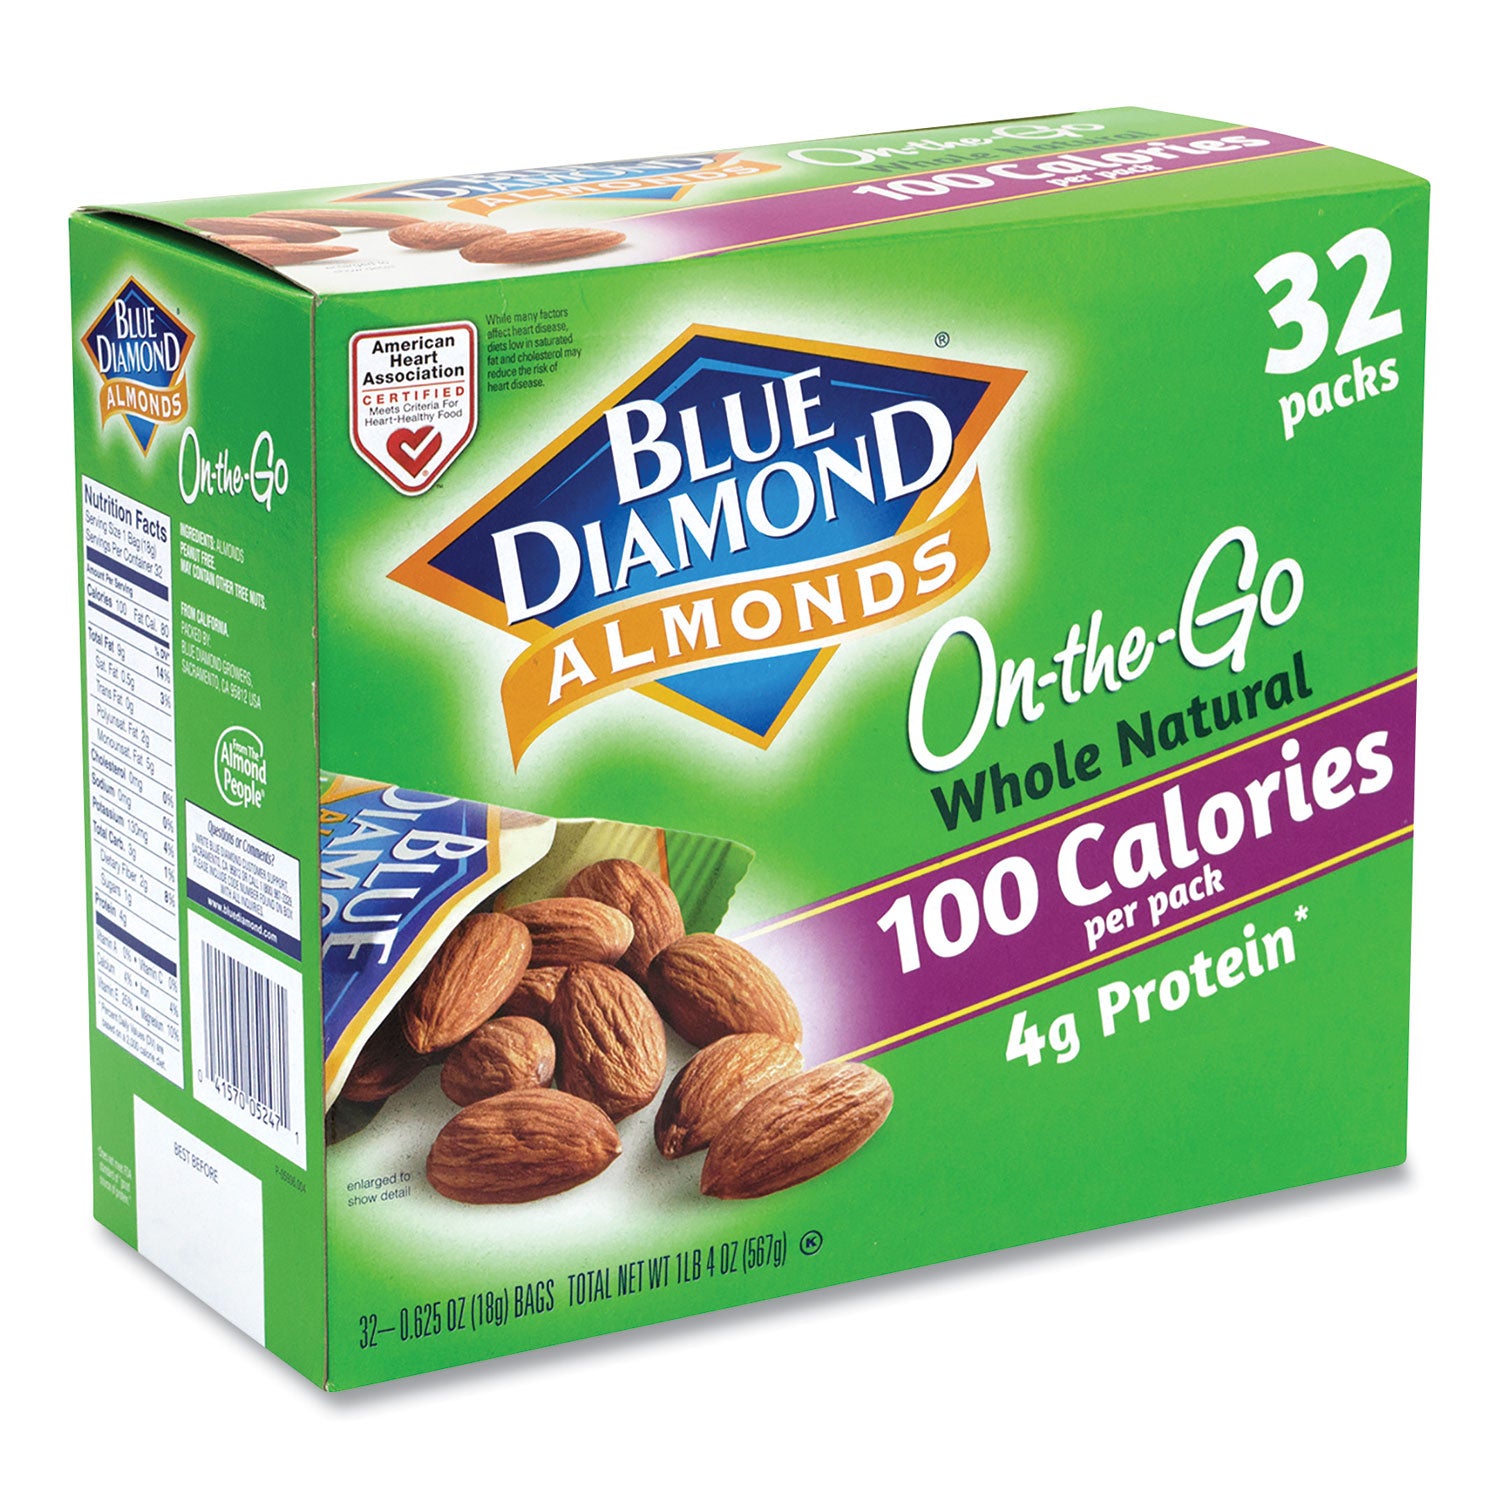 whole-natural-almonds-on-the-go-063-oz-pouch-32-pouches-carton-ships-in-1-3-business-days_grr22000512 - 1